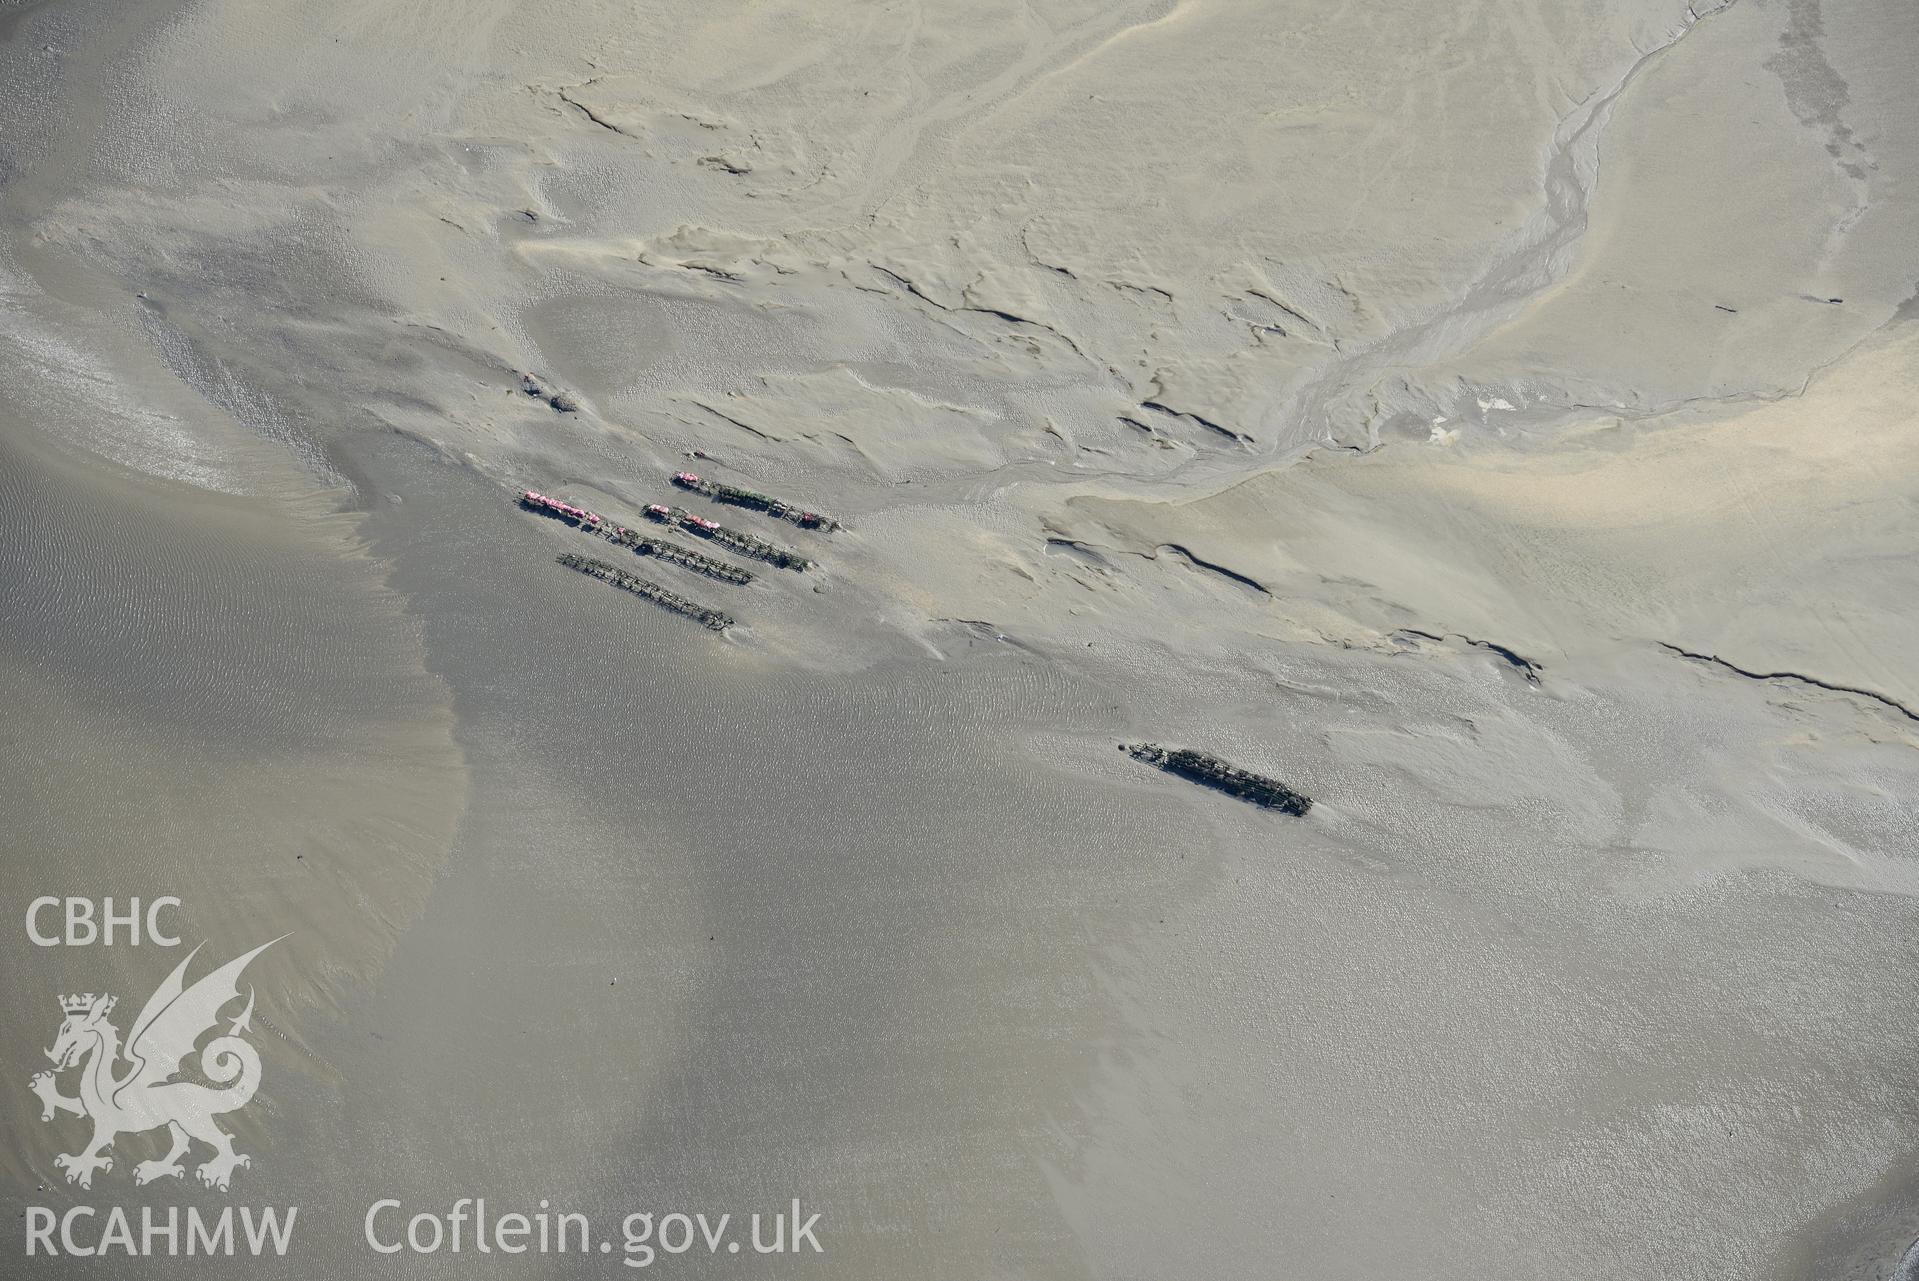 Cocklers on Llanrhidian Sands, on the northern shores of the Gower Peninsula. Oblique aerial photograph taken during the Royal Commission's programme of archaeological aerial reconnaissance by Toby Driver on 30th September 2015.